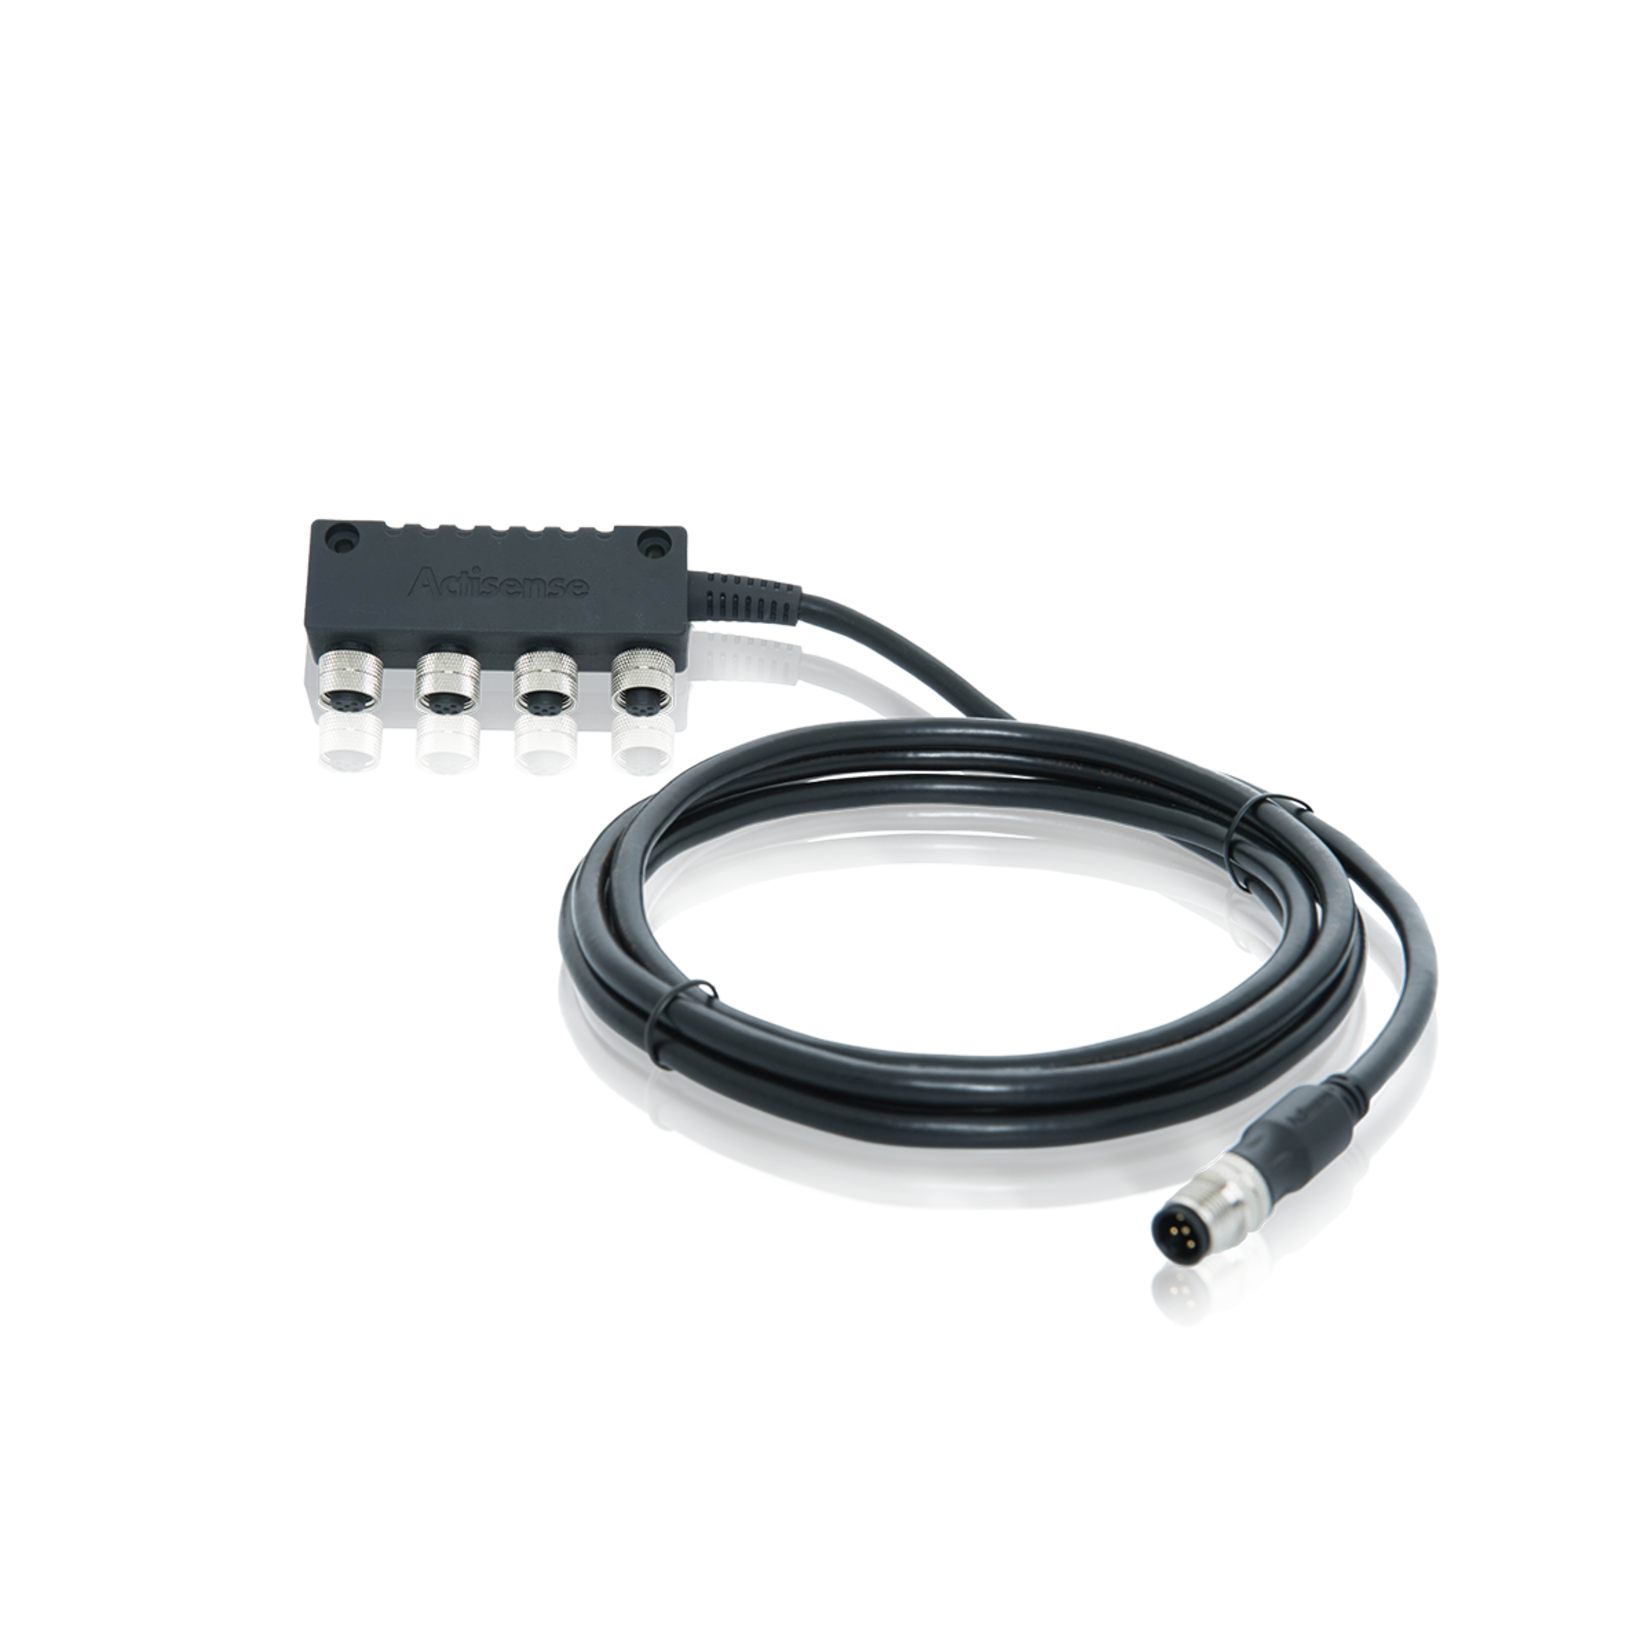 Actisense NMEA 2000 Cable Assembly